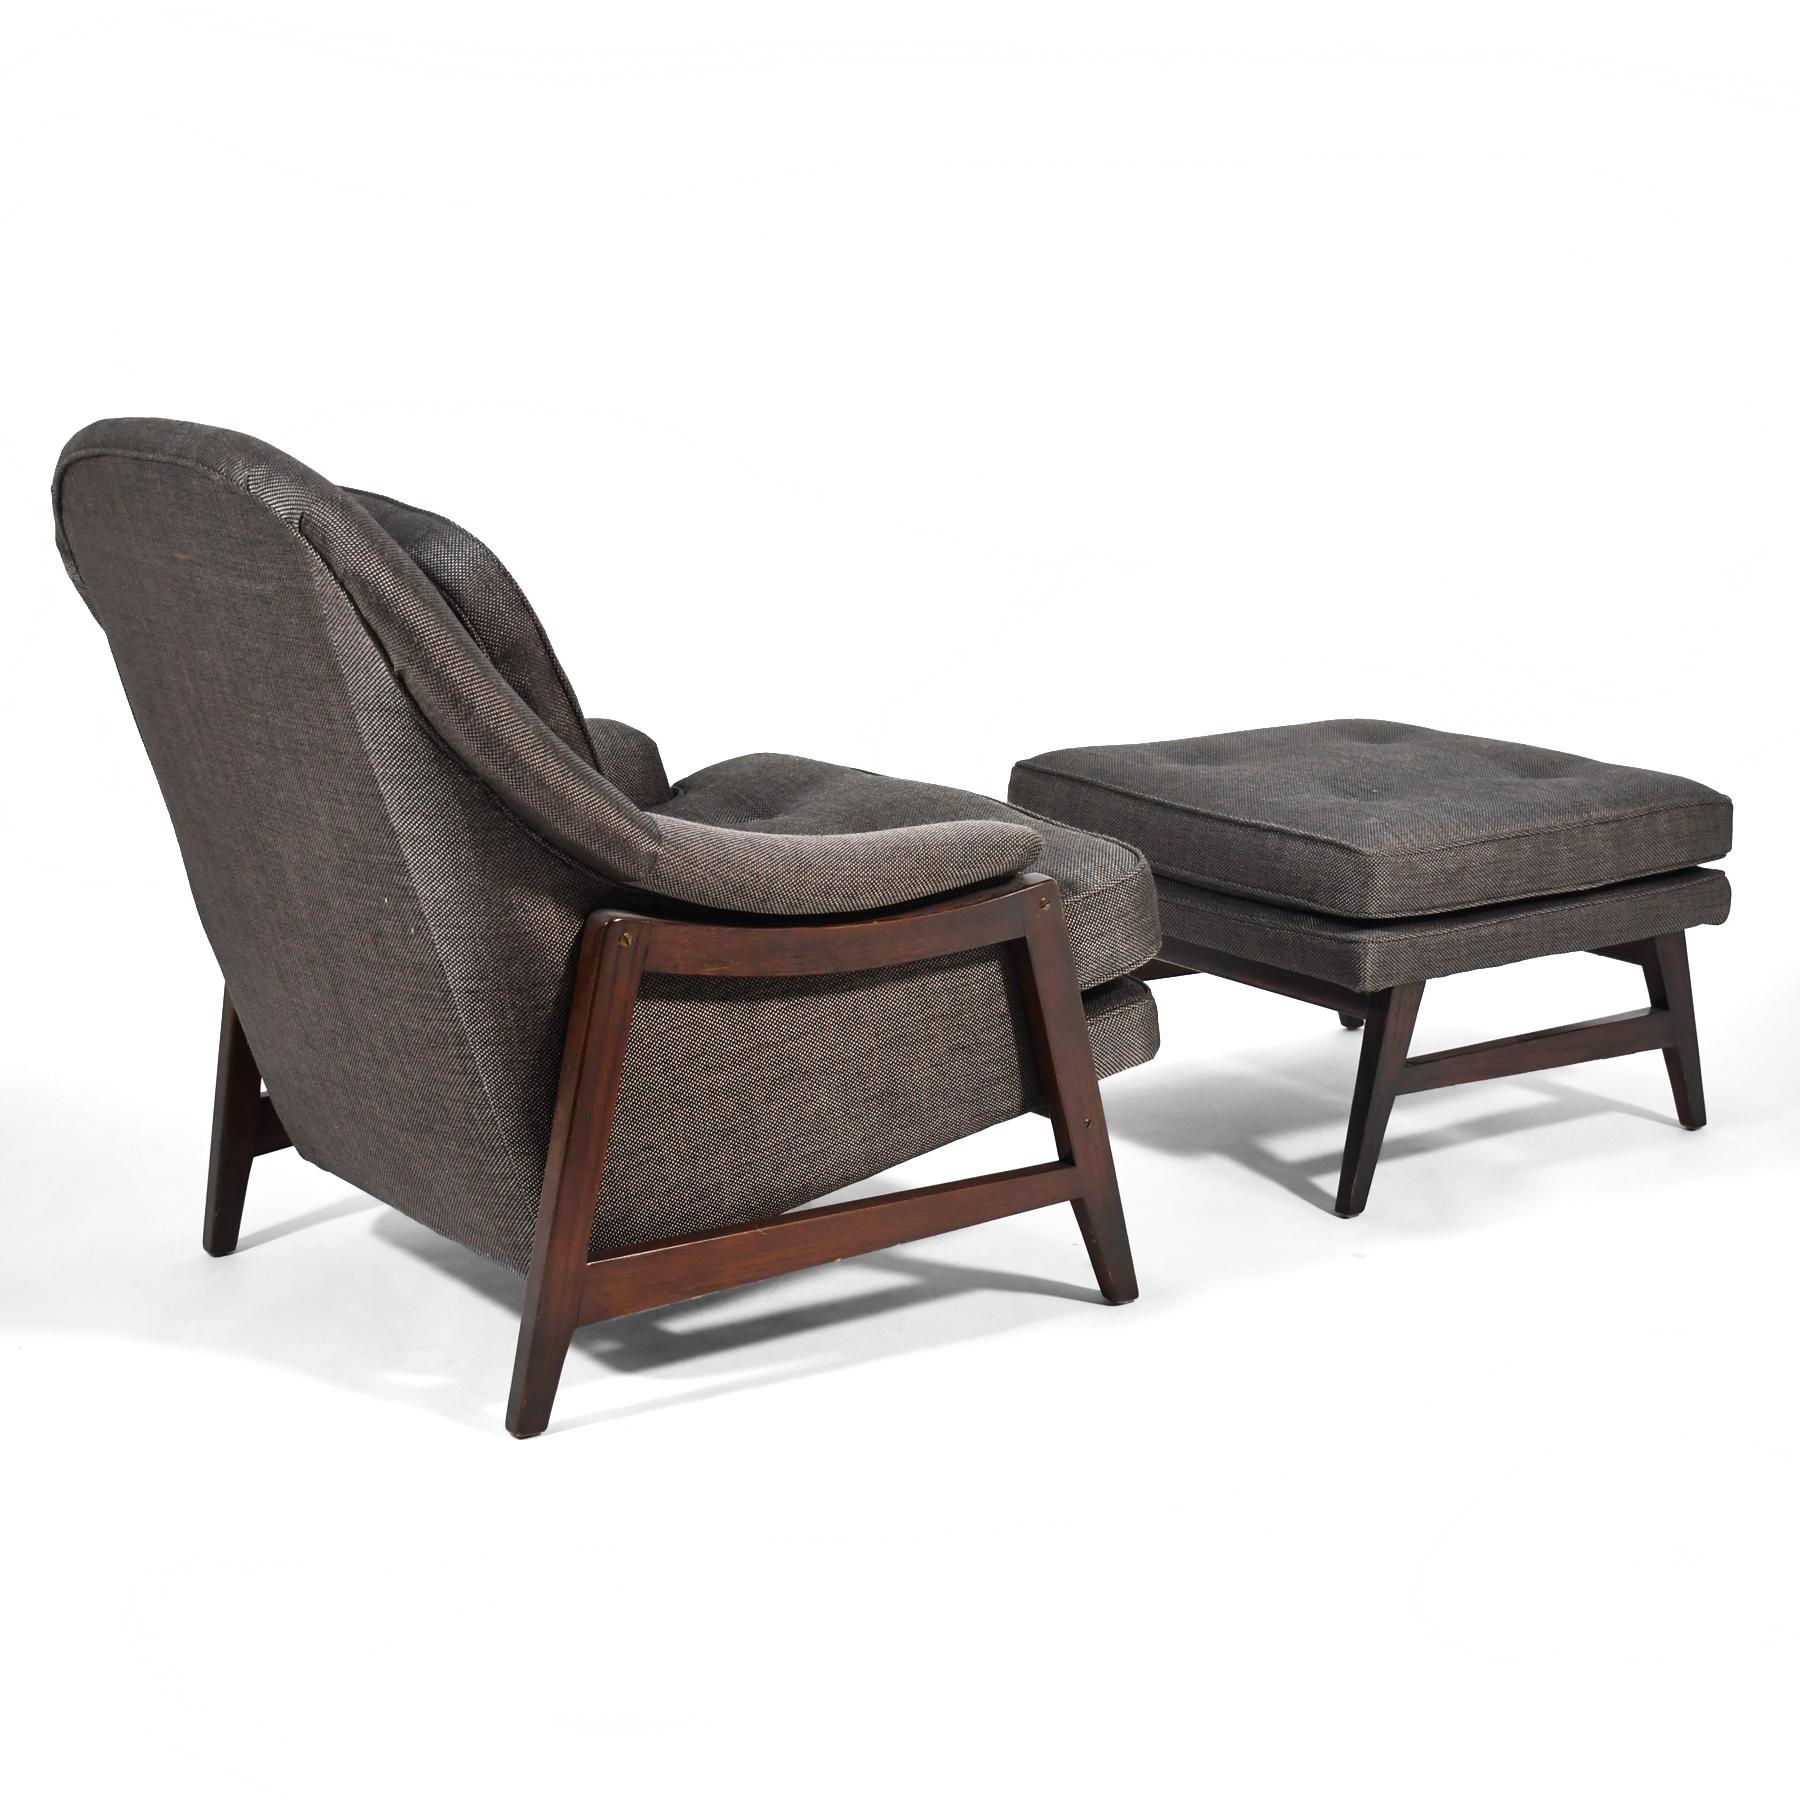 American Edward Wormley Model 5701 Lounge Chair & Ottoman For Sale